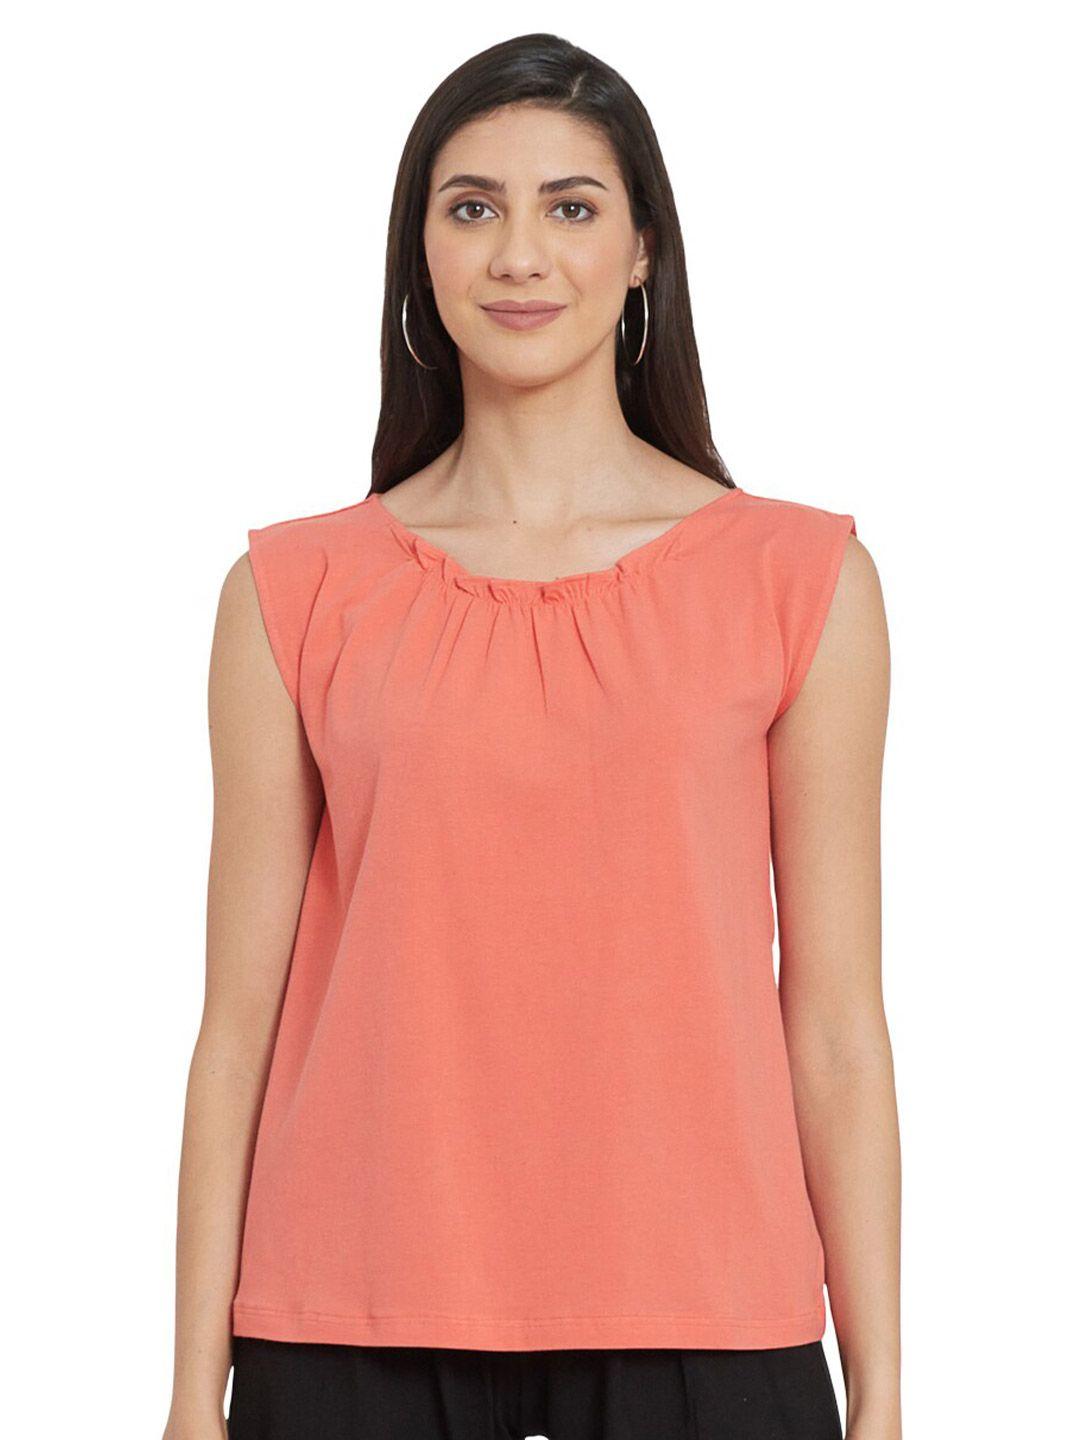 unmade women coral solid top